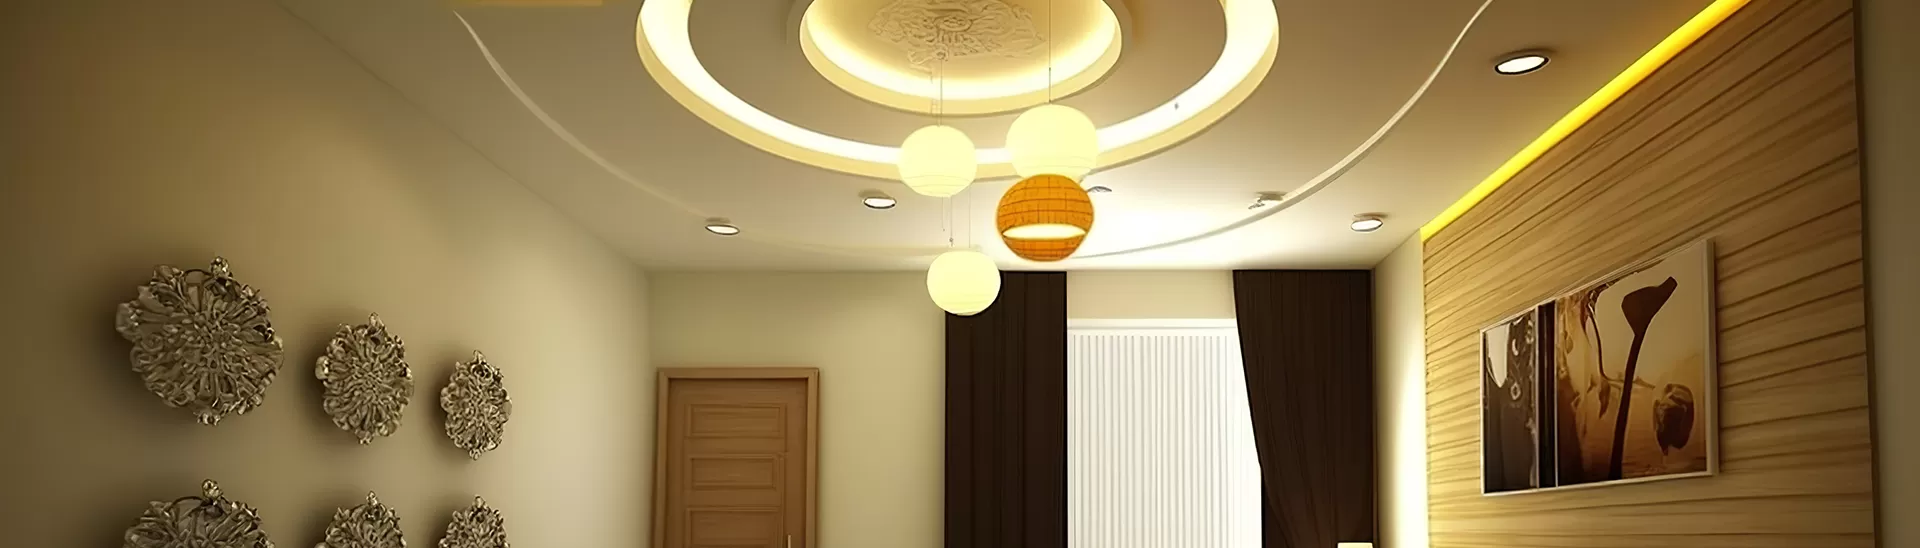 10 Stunning False Ceiling Designs To